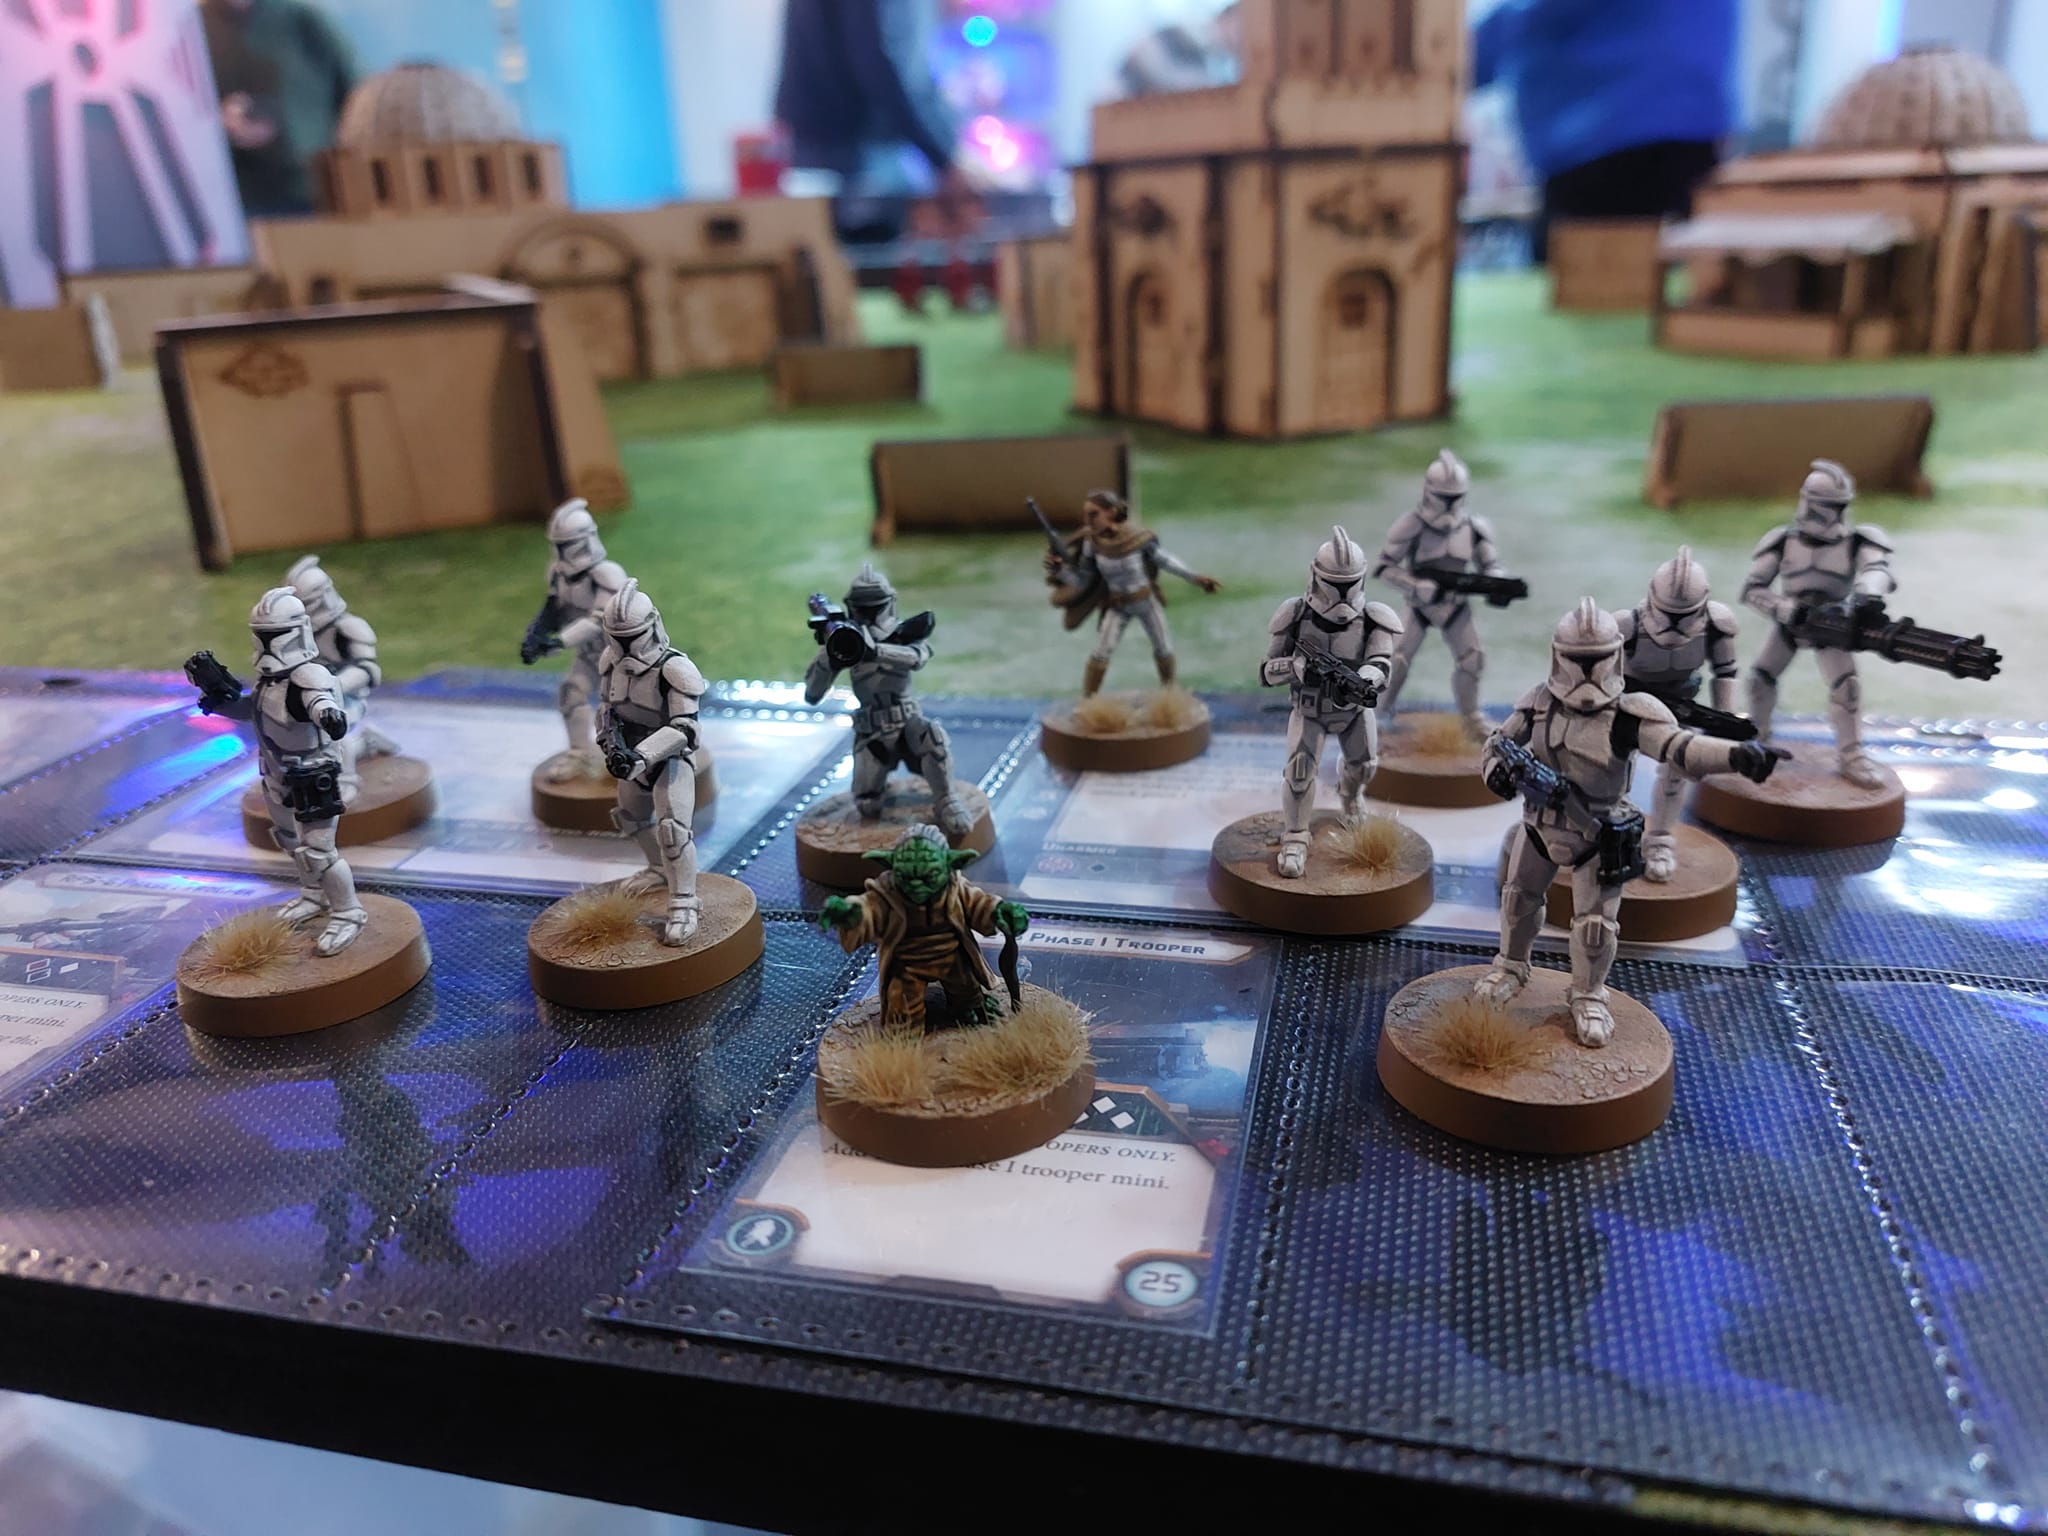 A game of Star Wars Legion miniatures game being played at the Happy Piranha café in Truro, Cornwall/